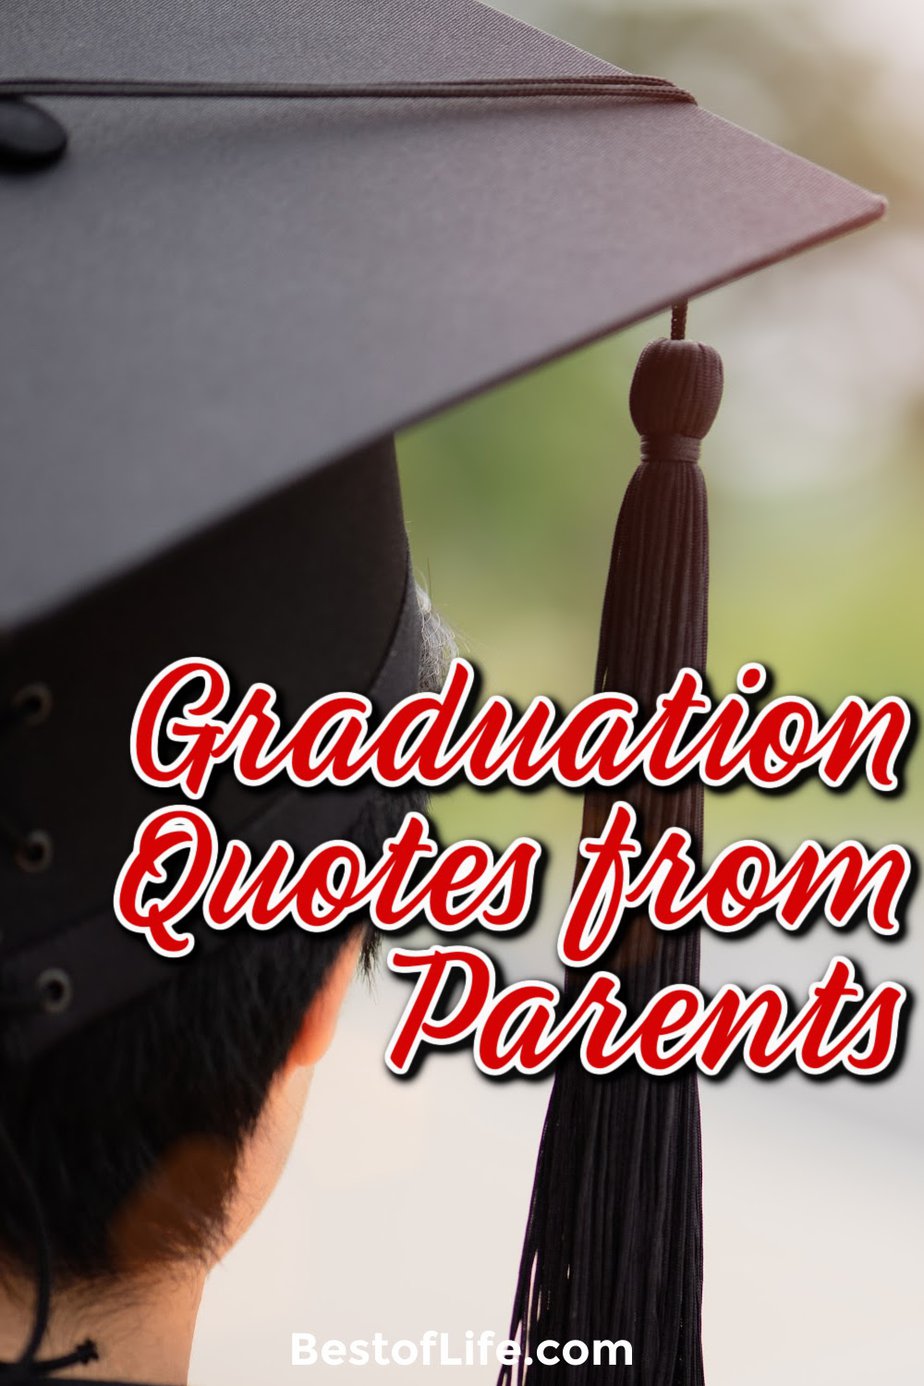 The best graduation quotes from parents can help you express your pride, joy, and love for graduates of any year. Quotes for Graduates | Parenting Tips | Quotes for Parents | Quotes for Son | Quotes for Daughter | Graduation Sayings for Parents #quotes #parents